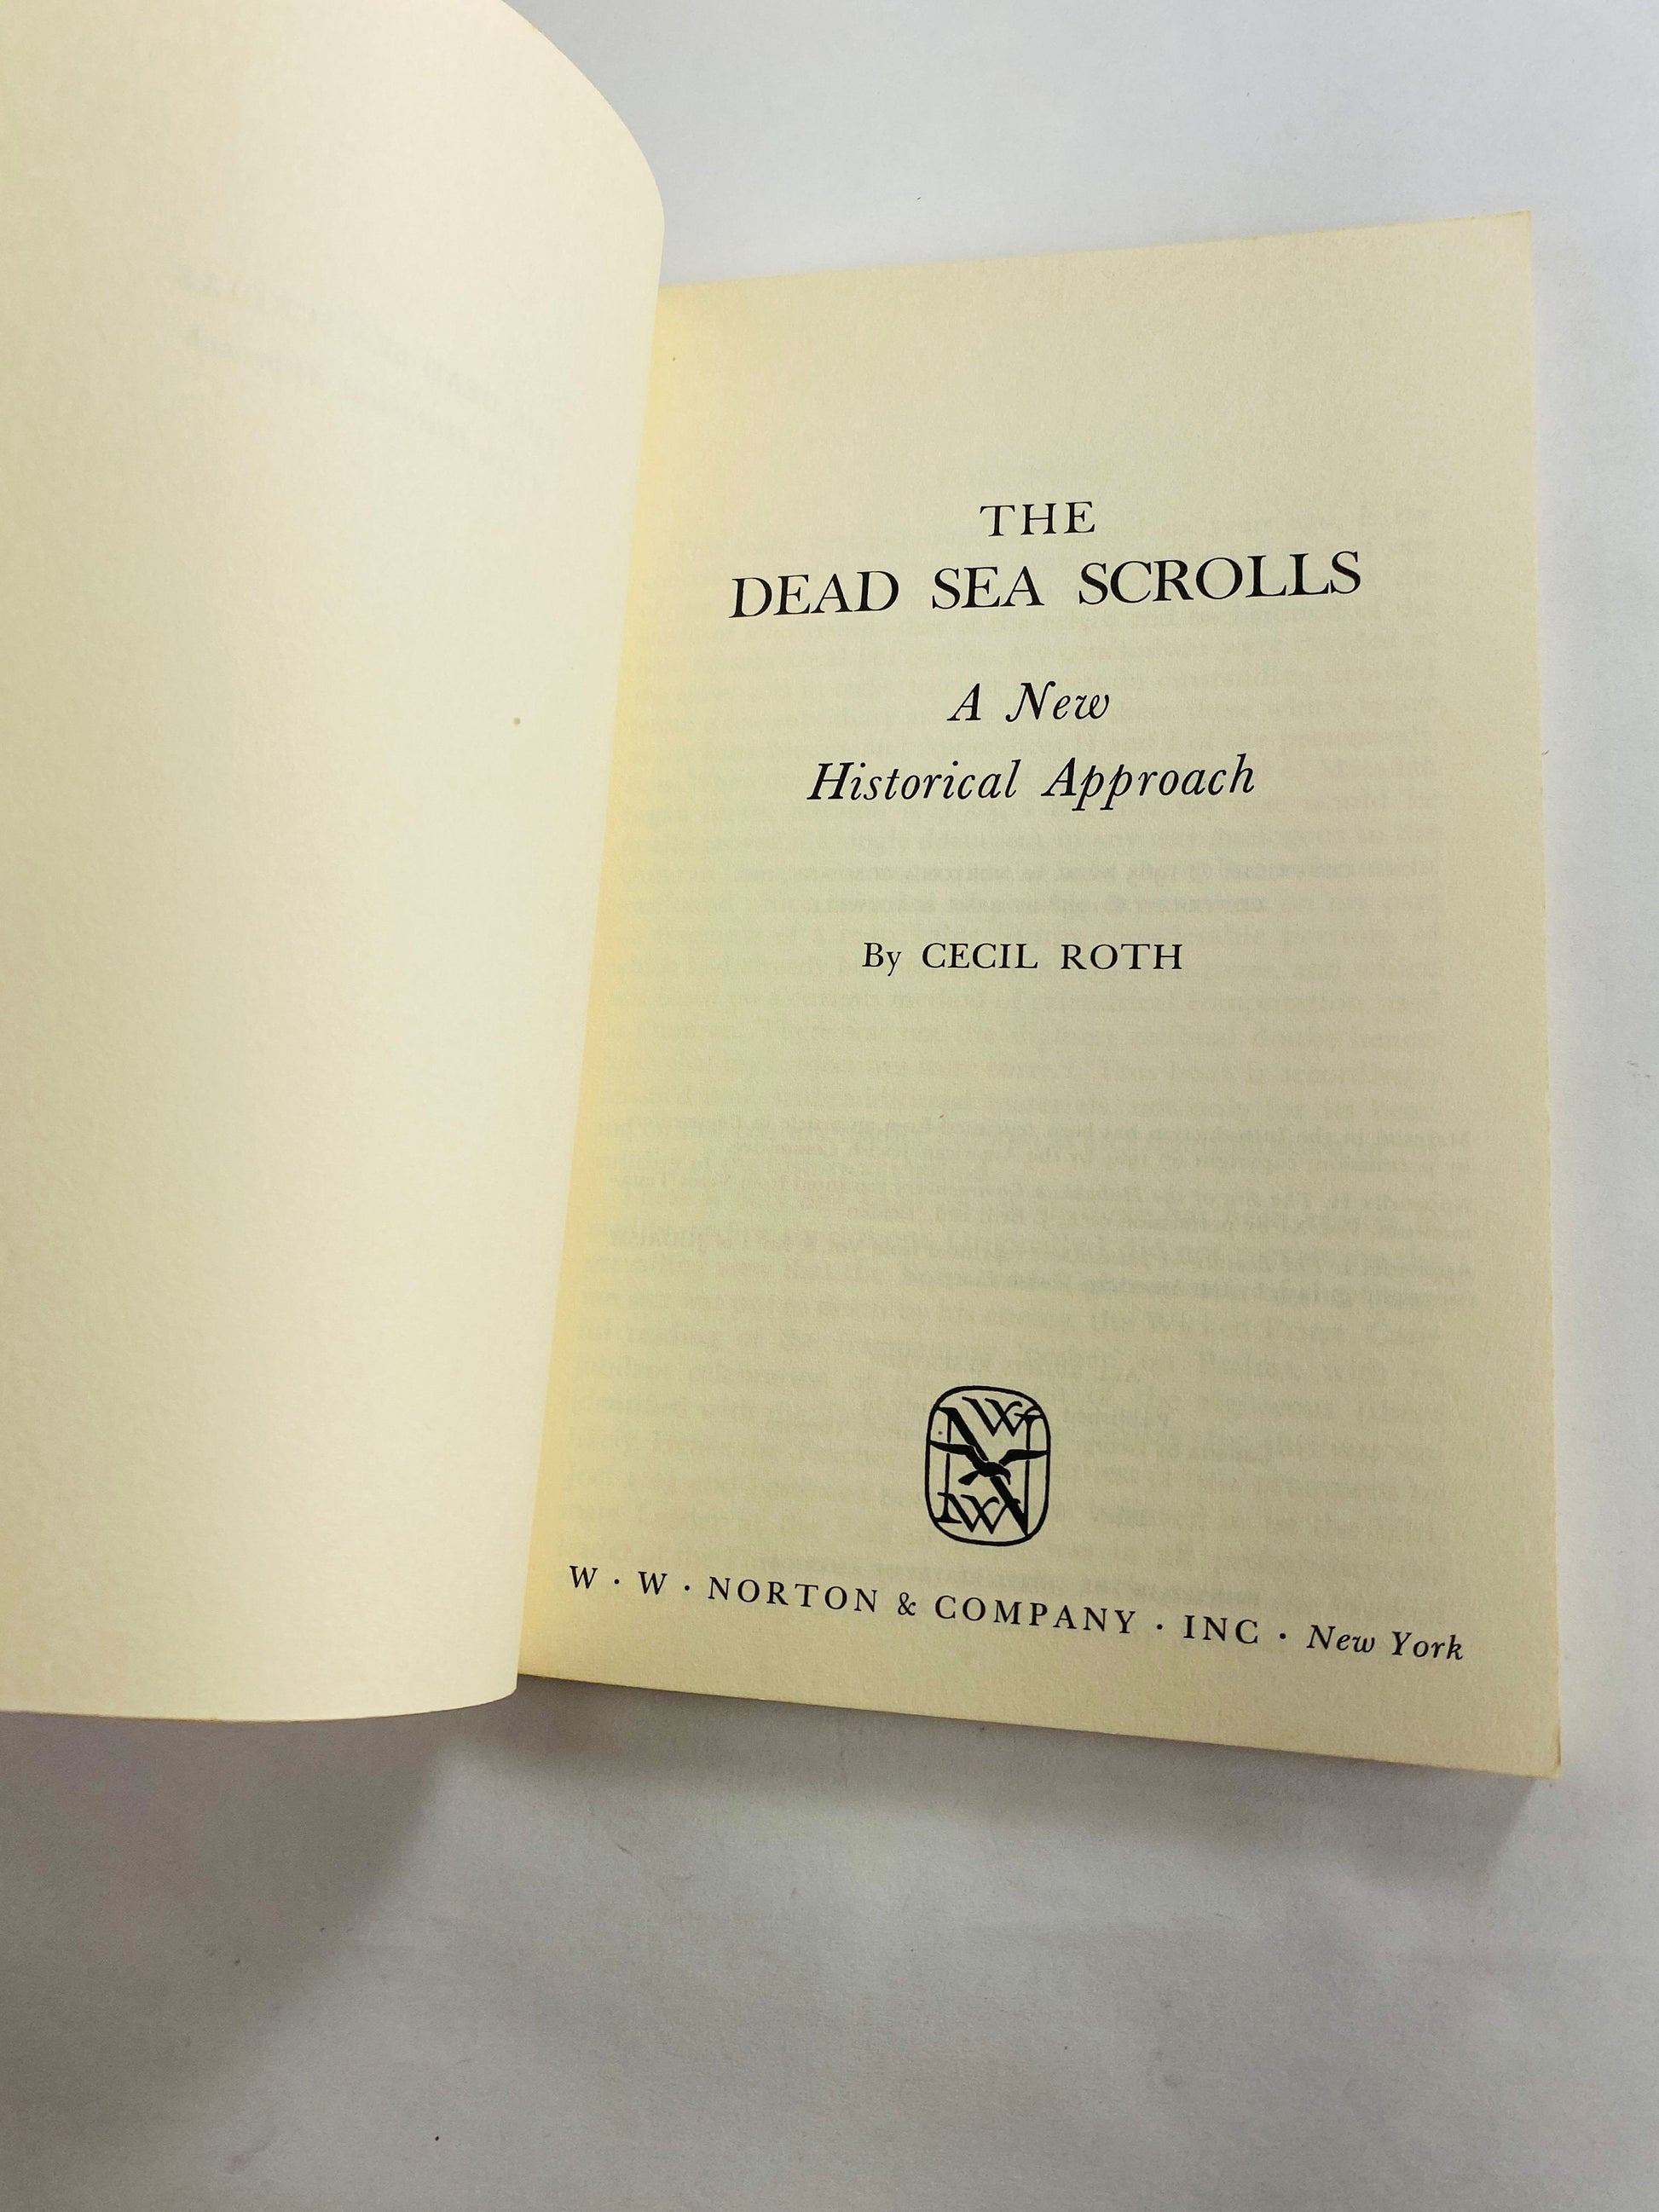 Dead Sea Scrolls A New Historical Approach vintage paperback book by Cecil Roth circa 1965